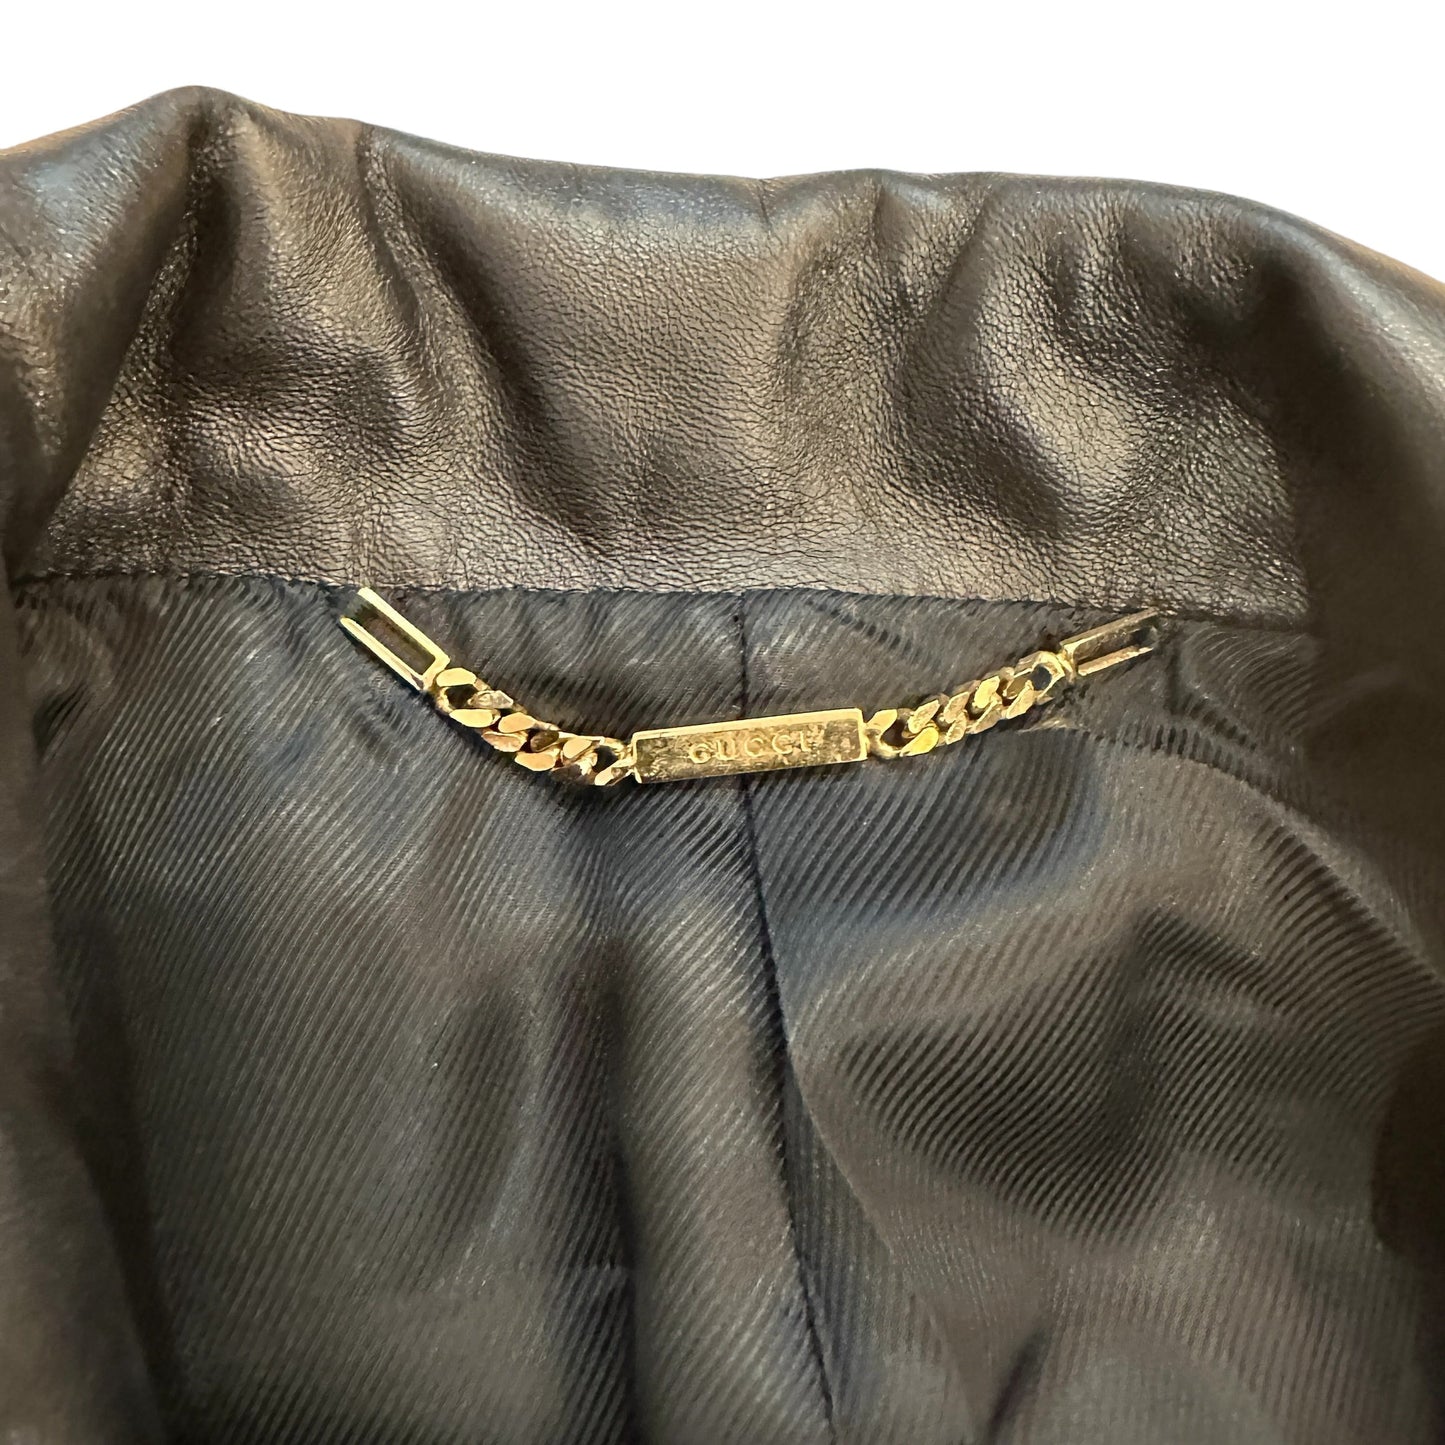 Vintage Gucci by Tom Ford Jacket - M